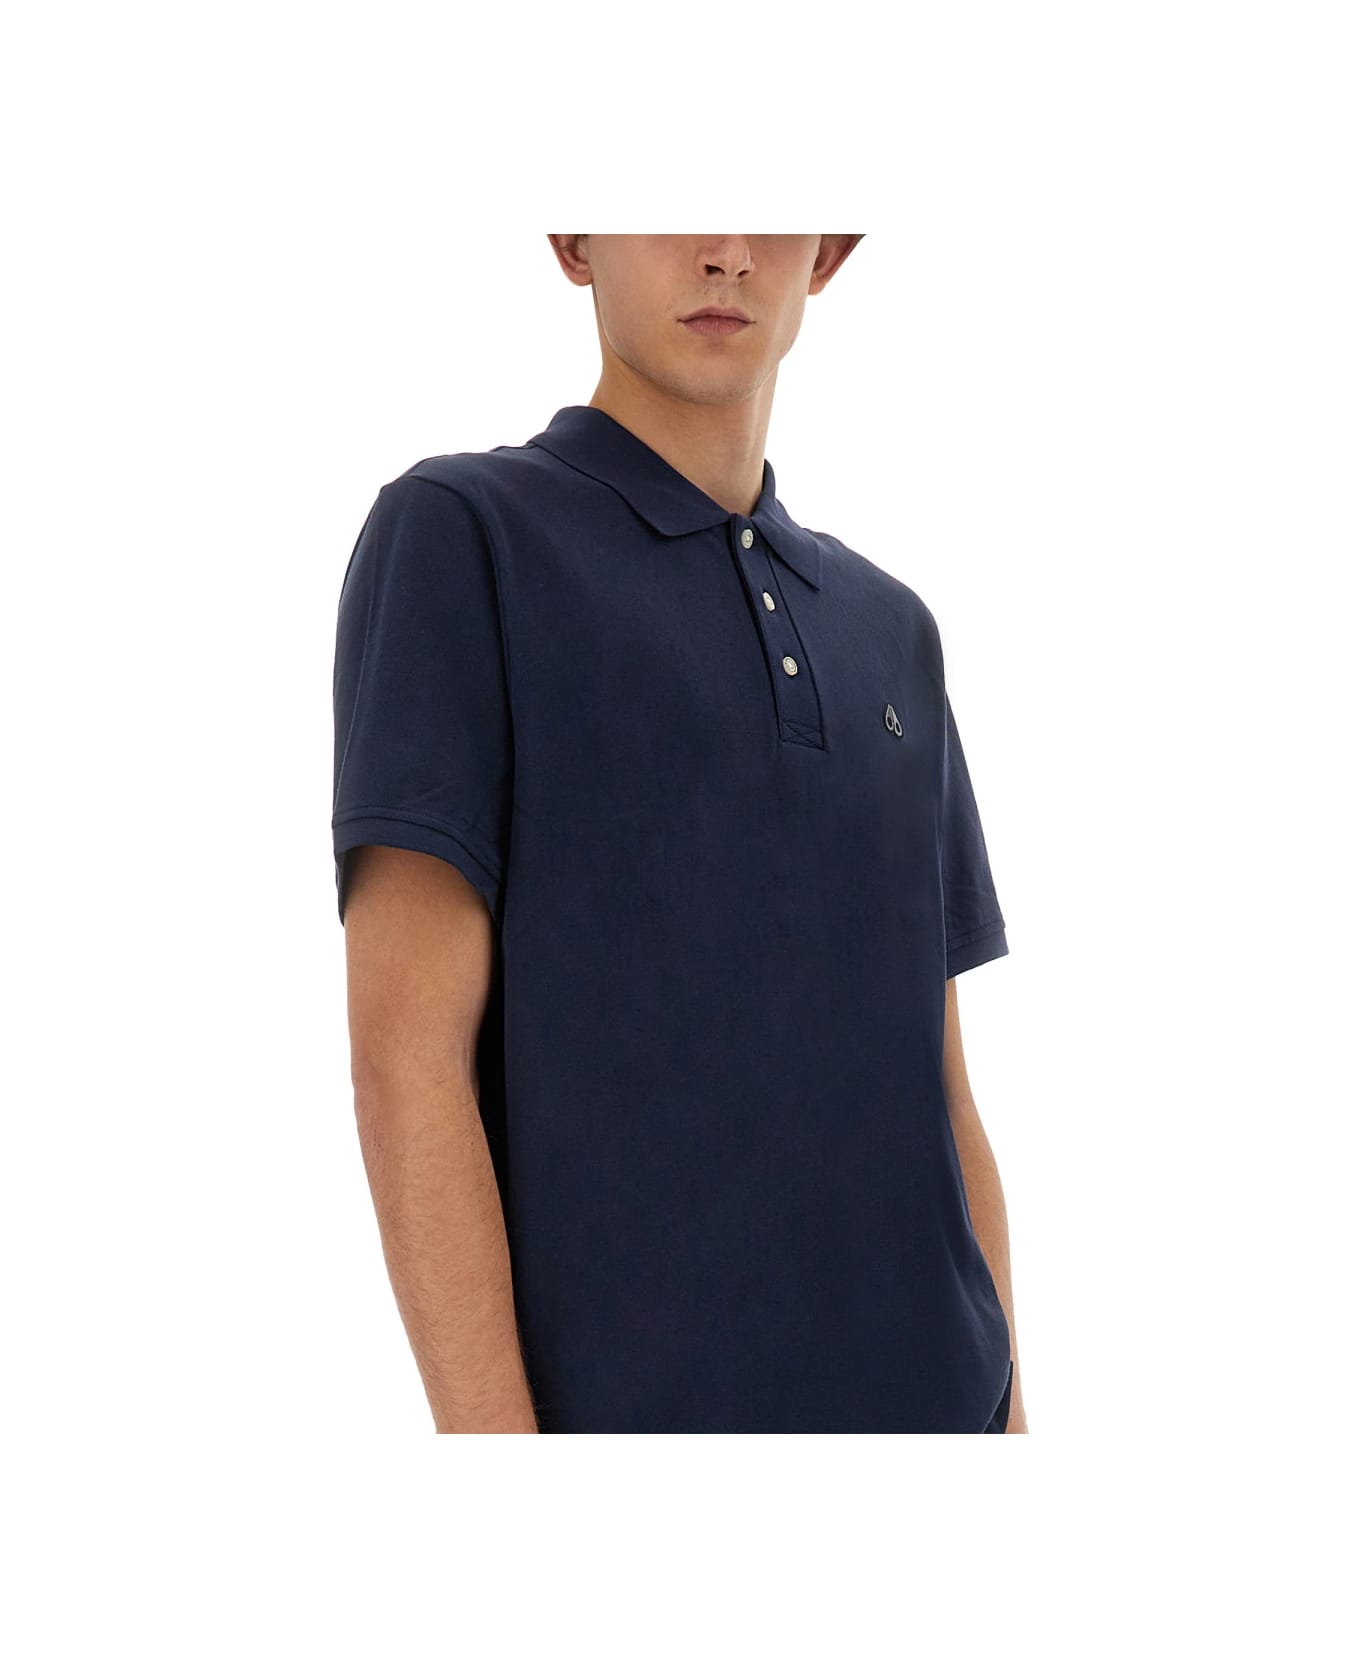 Moose Knuckles Polo In Pique. - BLUE